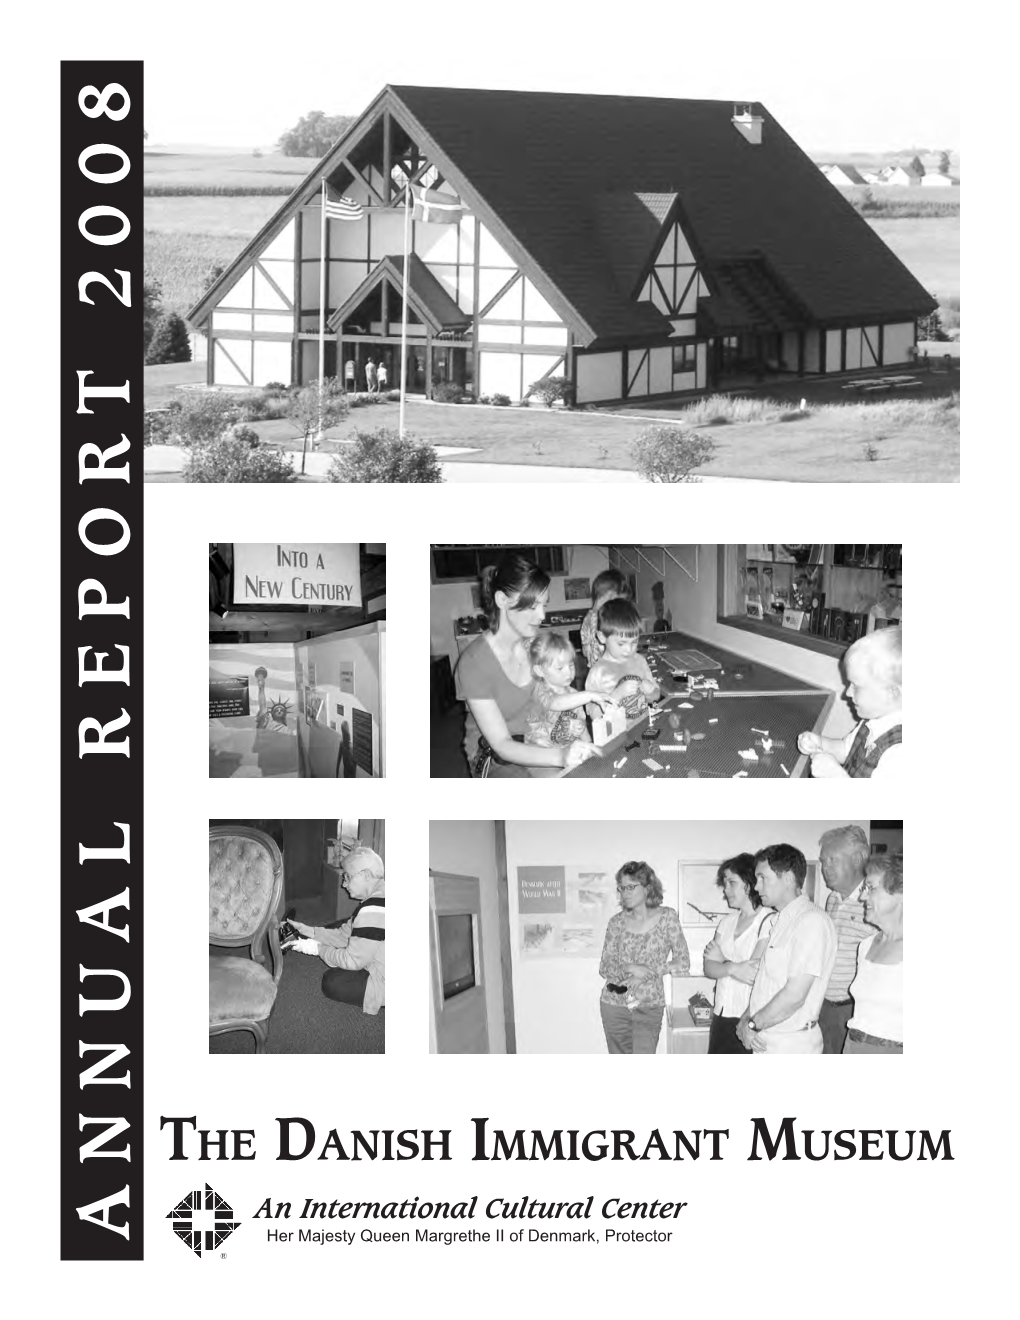 The Danish Immigrant Museum Has Been a Generous Supporter, Our Building Immigrant Observed! a Grand Celebratory Tent Structure Is Now Debt Free